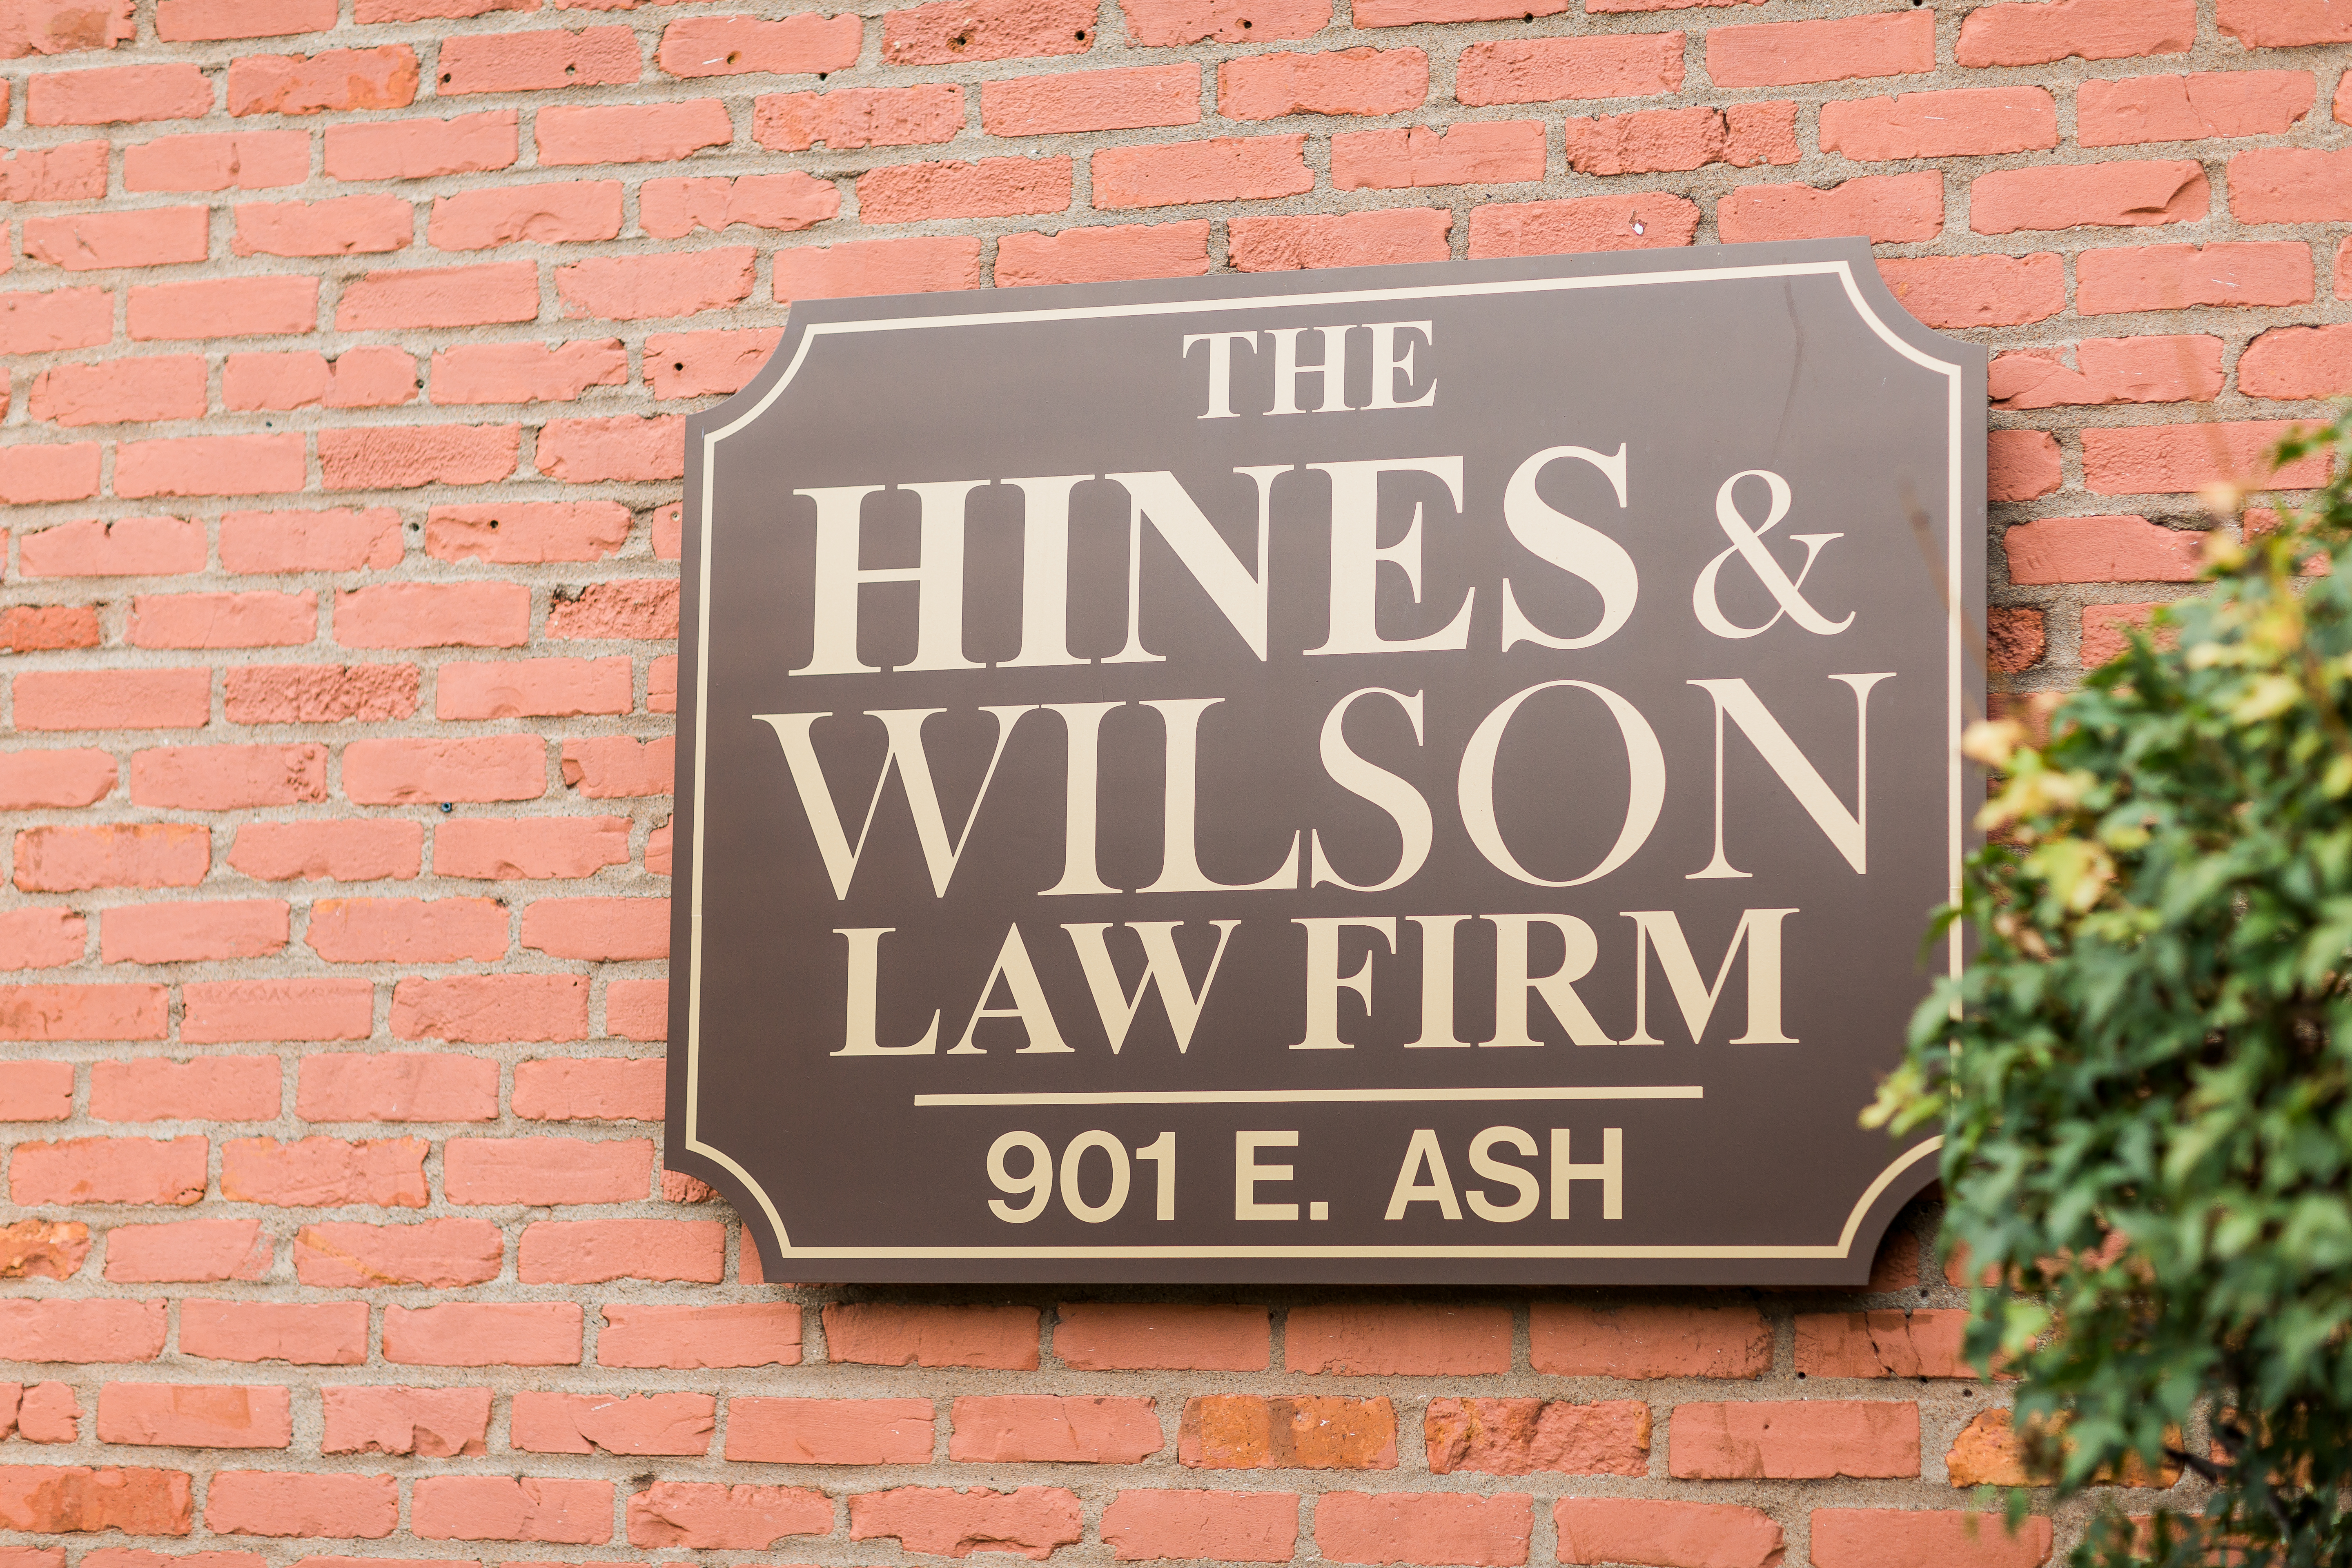 the hines & wilson law firm sign on the side of a brick building